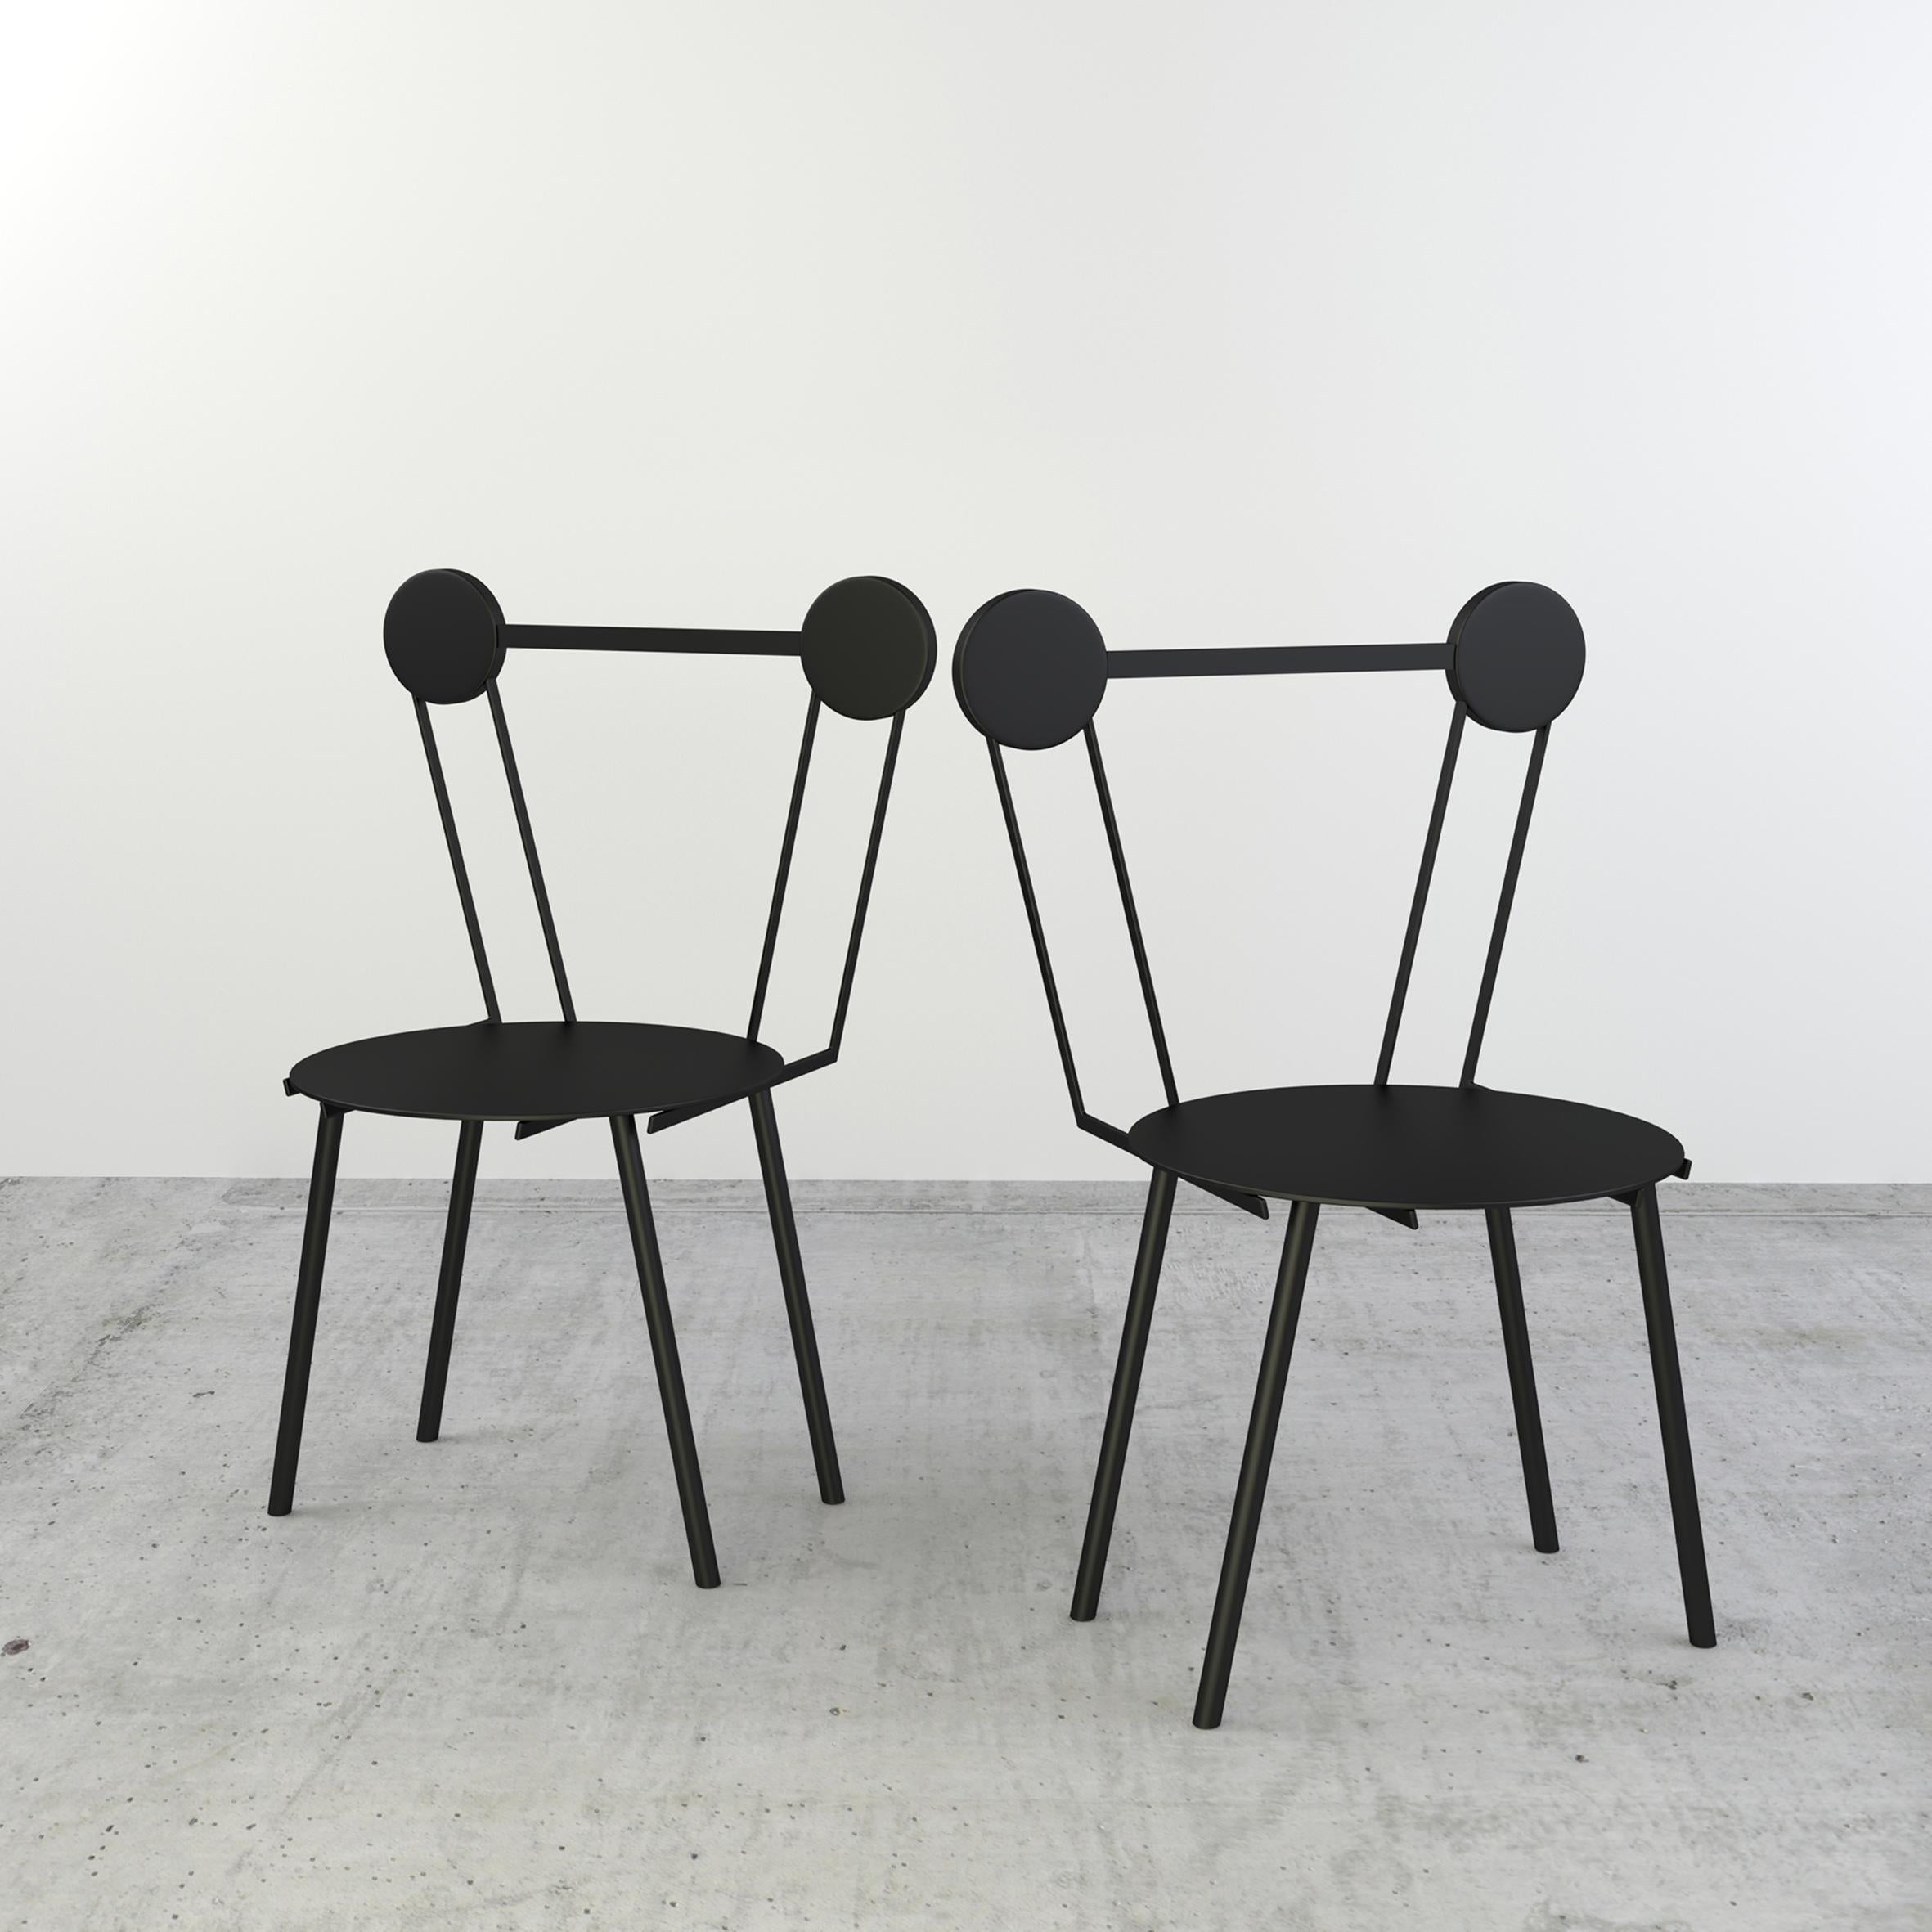 Haly is a contemporary sculptural seating with circular shapes and soft lines.

Crafted of metal, Haly chair combines a bold attitude and a delicate profile. Haly was designed by combining the different methods of metal working with research on the